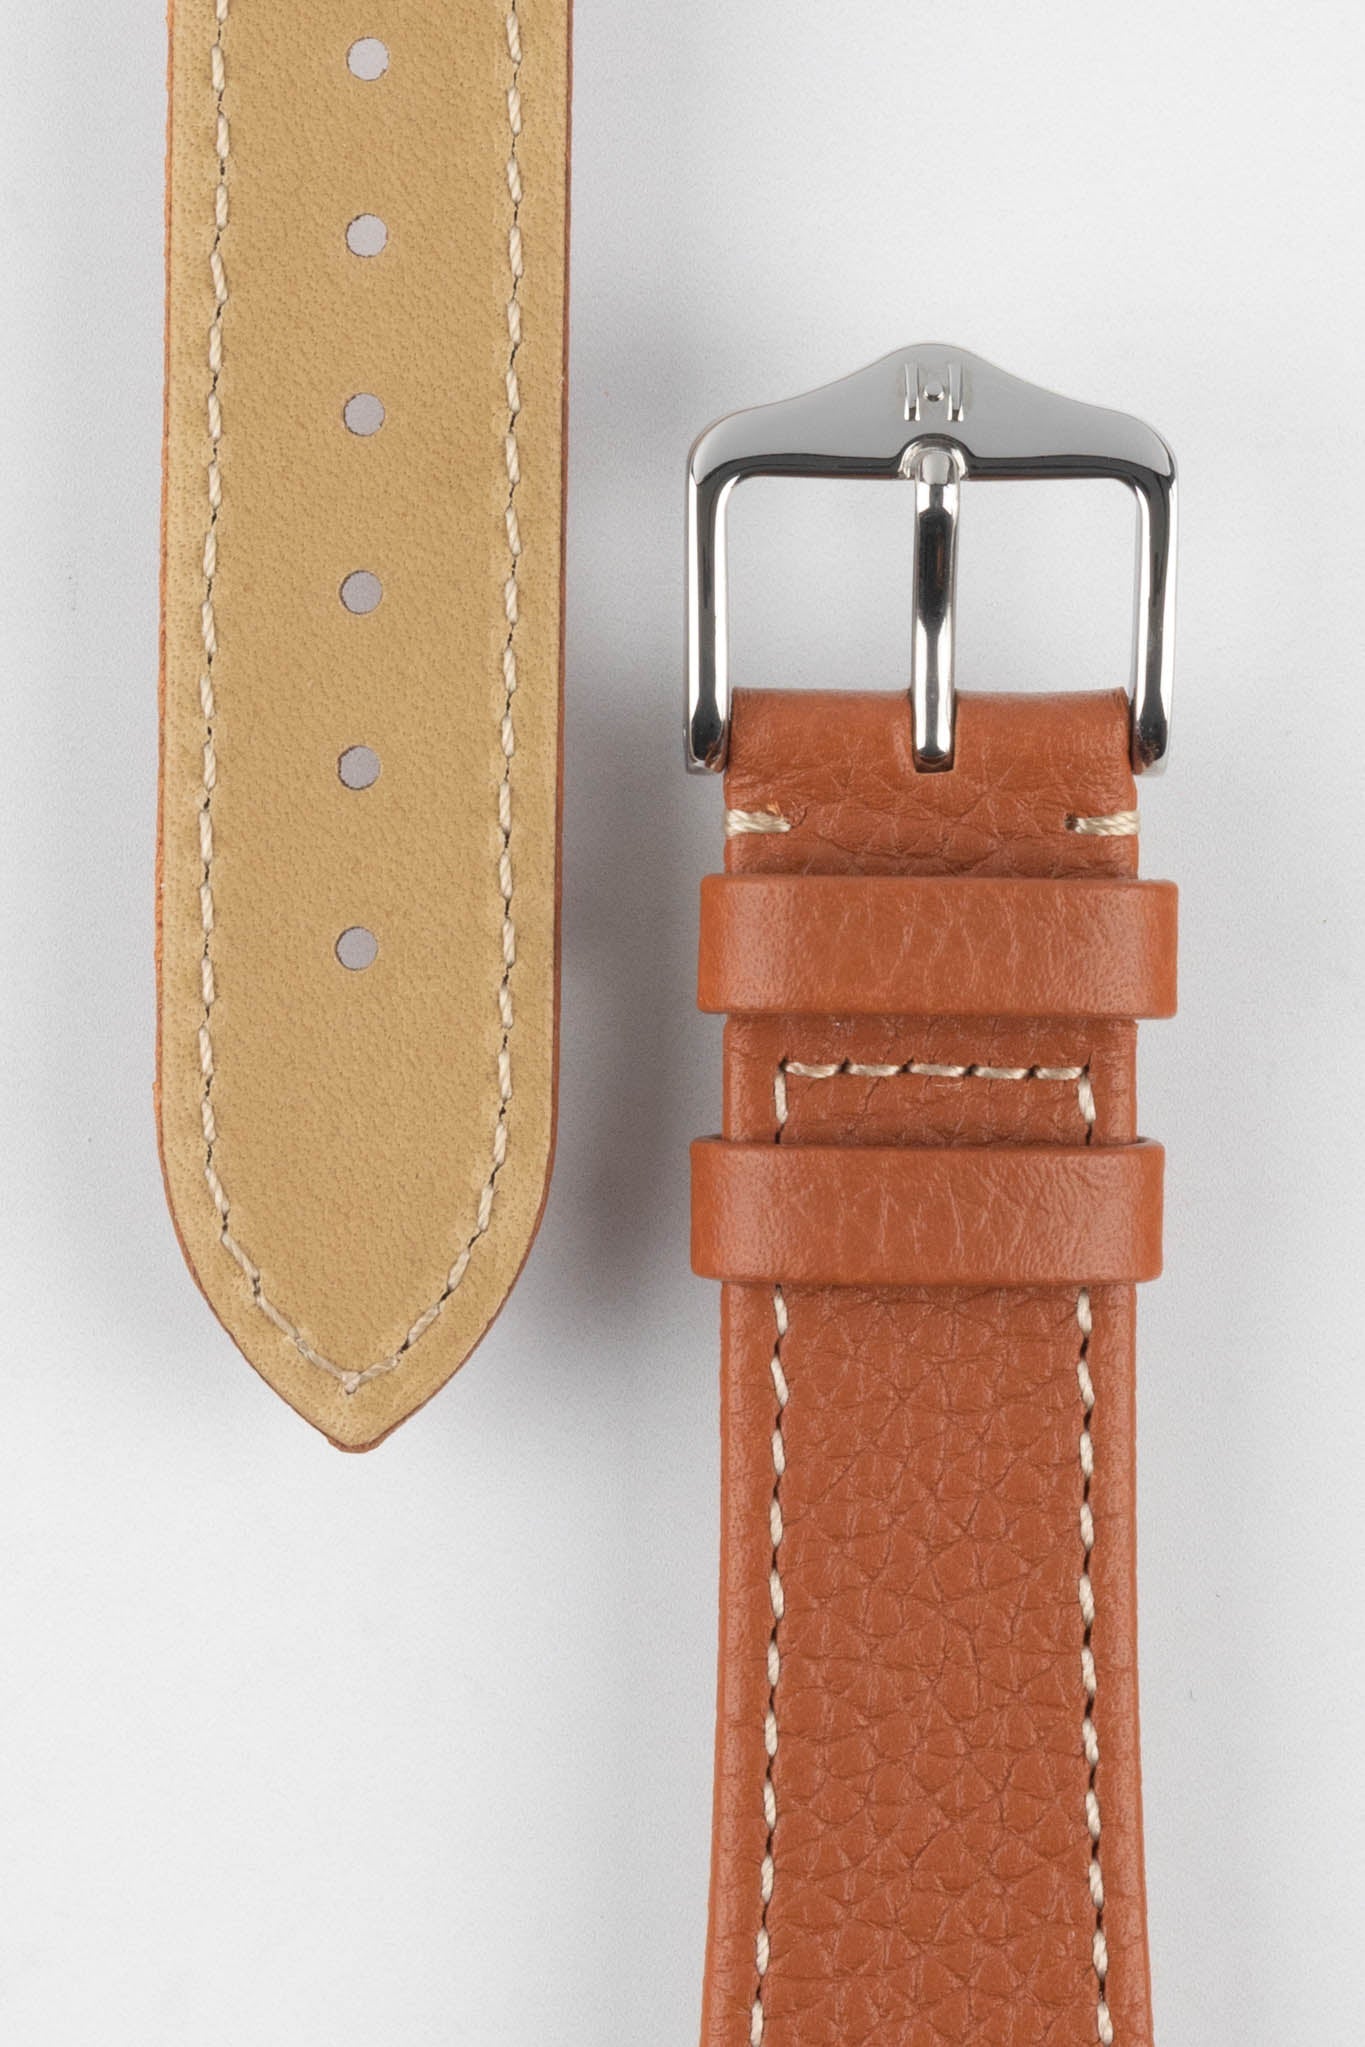 Buckle and Tail end of Gold Brown Hirsch Bologna Leather watch strap with logo embossed buckle